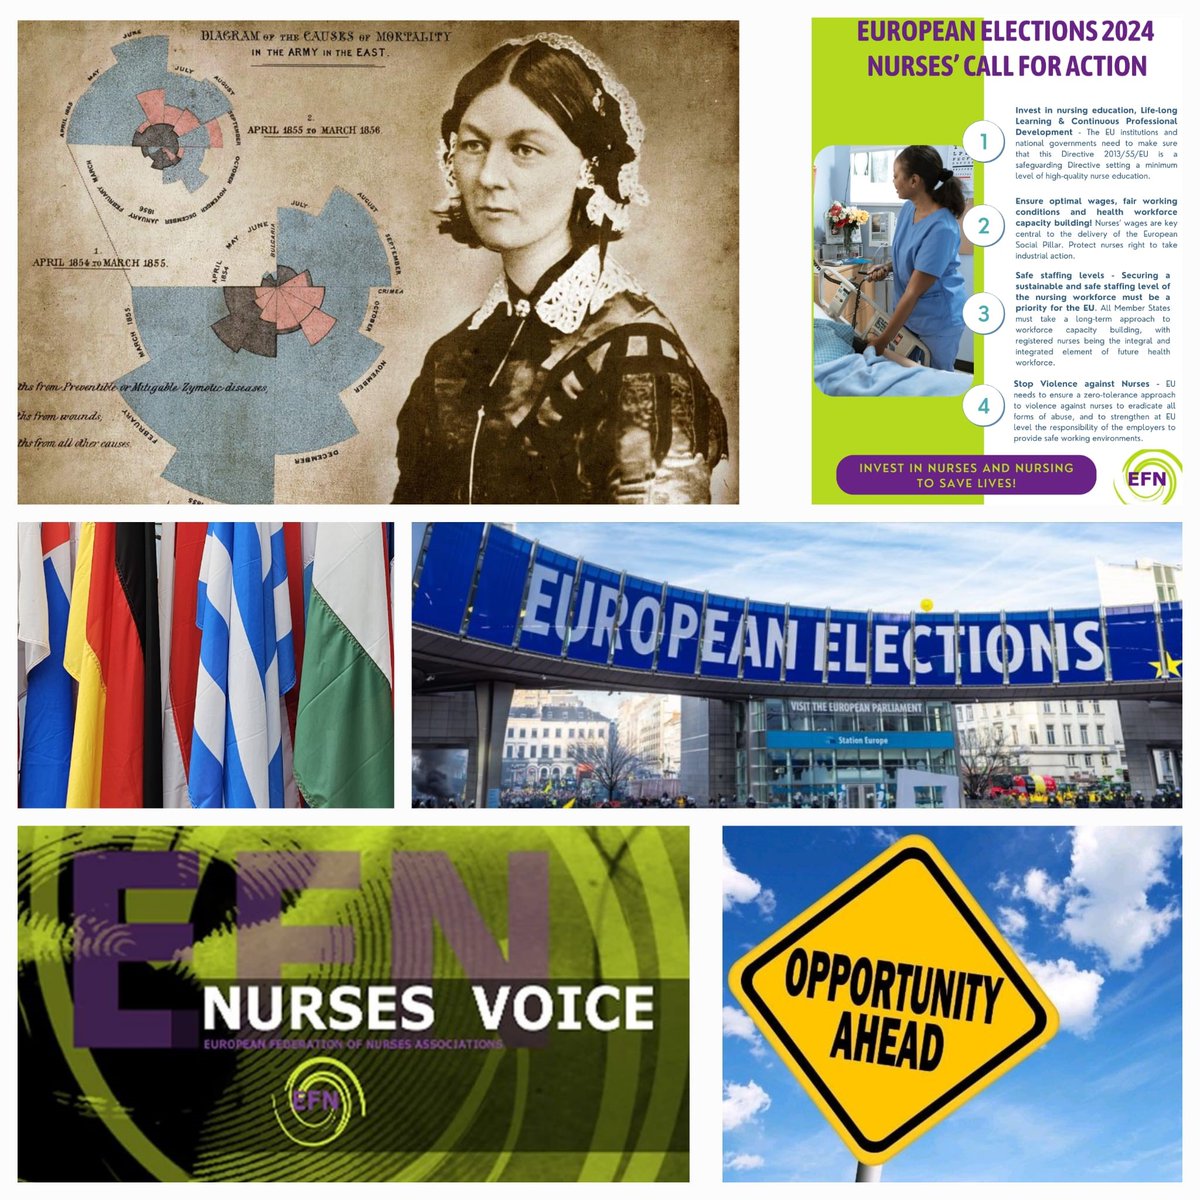 The 12th of May marks #IND2024, the anniversary of the birth of Florence Nightingale. With the upcoming #EUelections, this year’s celebration is an opportunity to reflect on the great work that still needs to be done to advance #Nursing in the EU. shorturl.at/vAFK0 #EFN